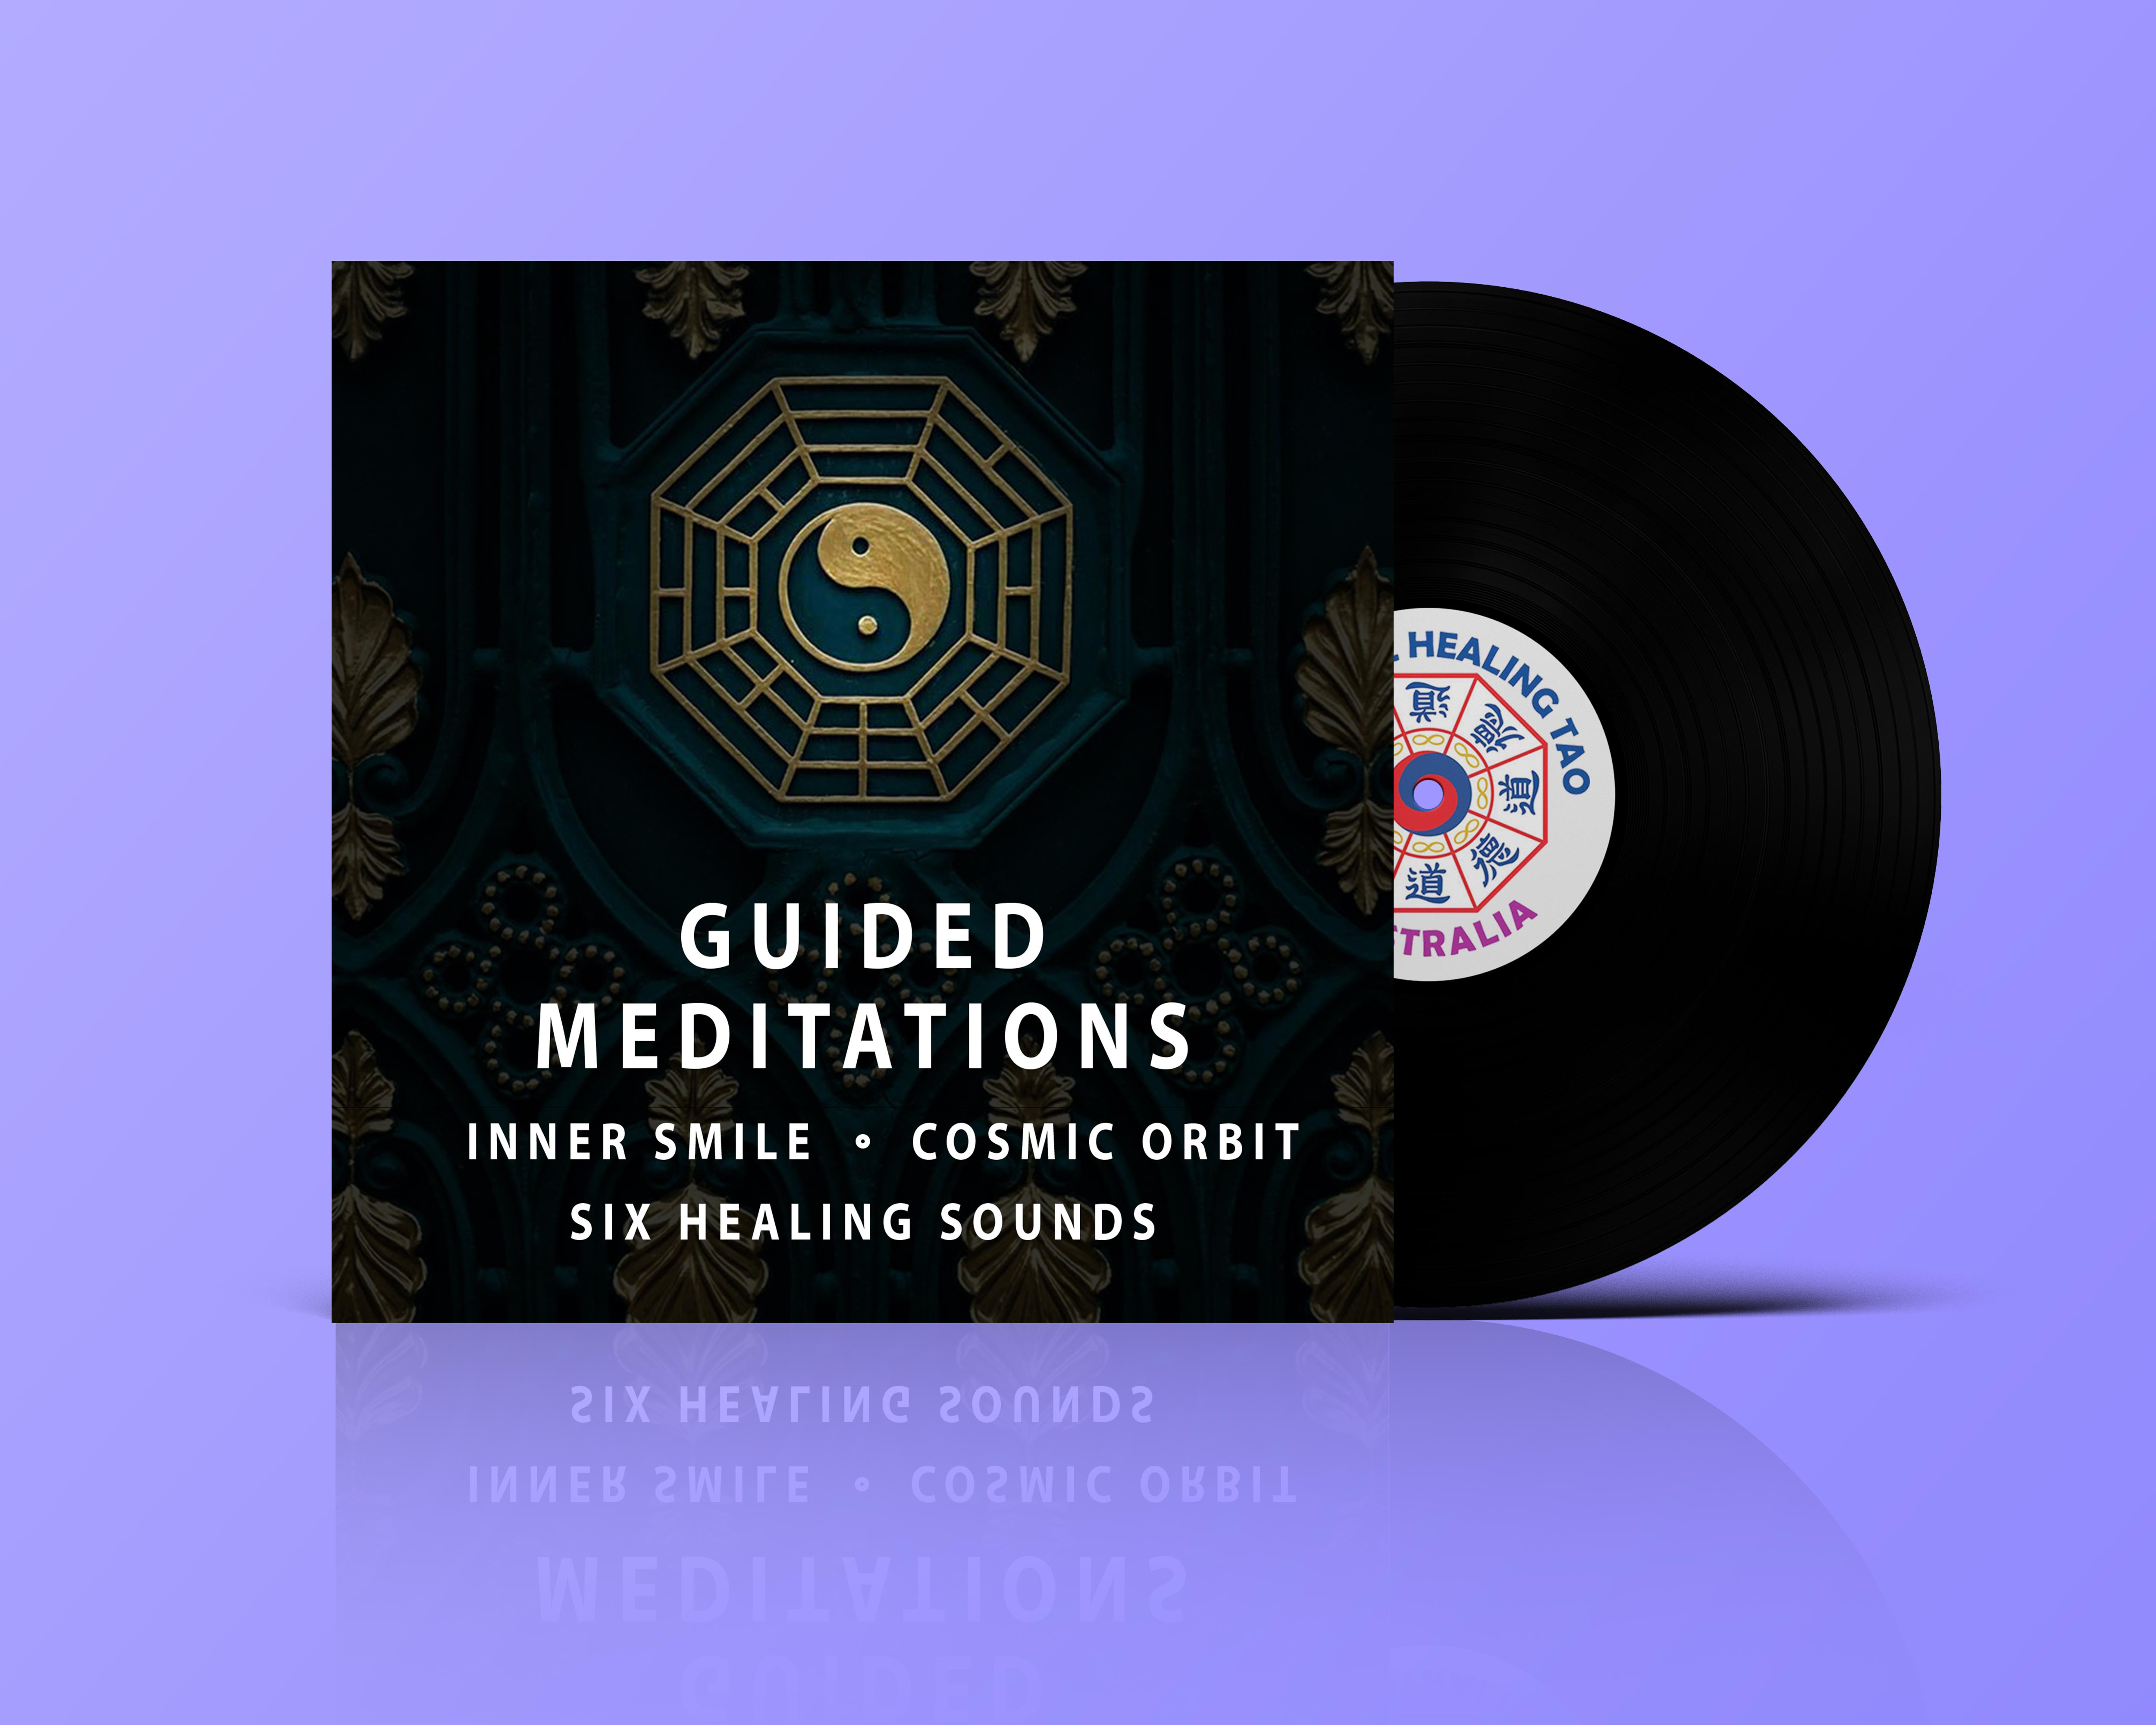 Tao meditations audio product featuring the inner smile, six healing sounds, micro cosmic and macro cosmic orbit